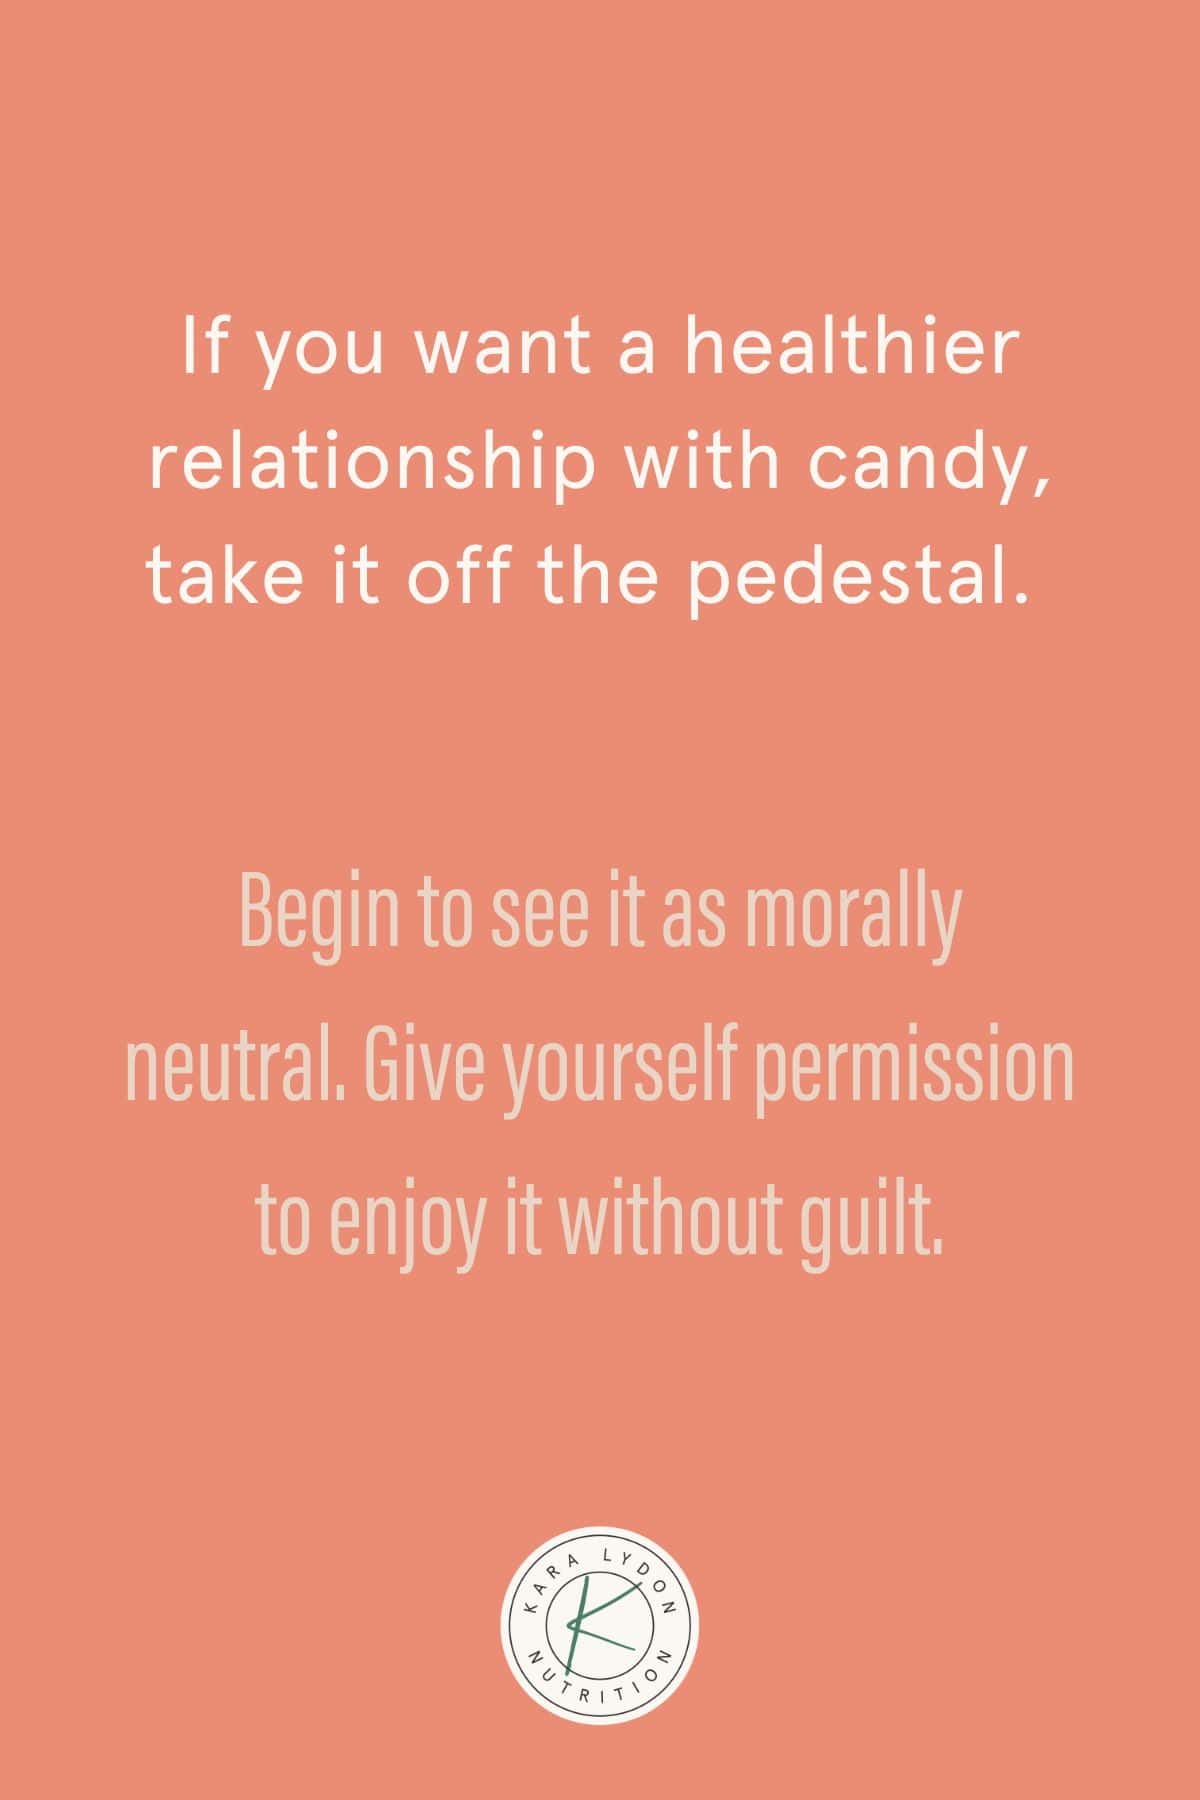 Graphic with quote: "If you want a healthier relationship with candy, take it off the pedestal.  Begin to see it as morally neutral.  Give yourself permission to enjoy it guilt-free."